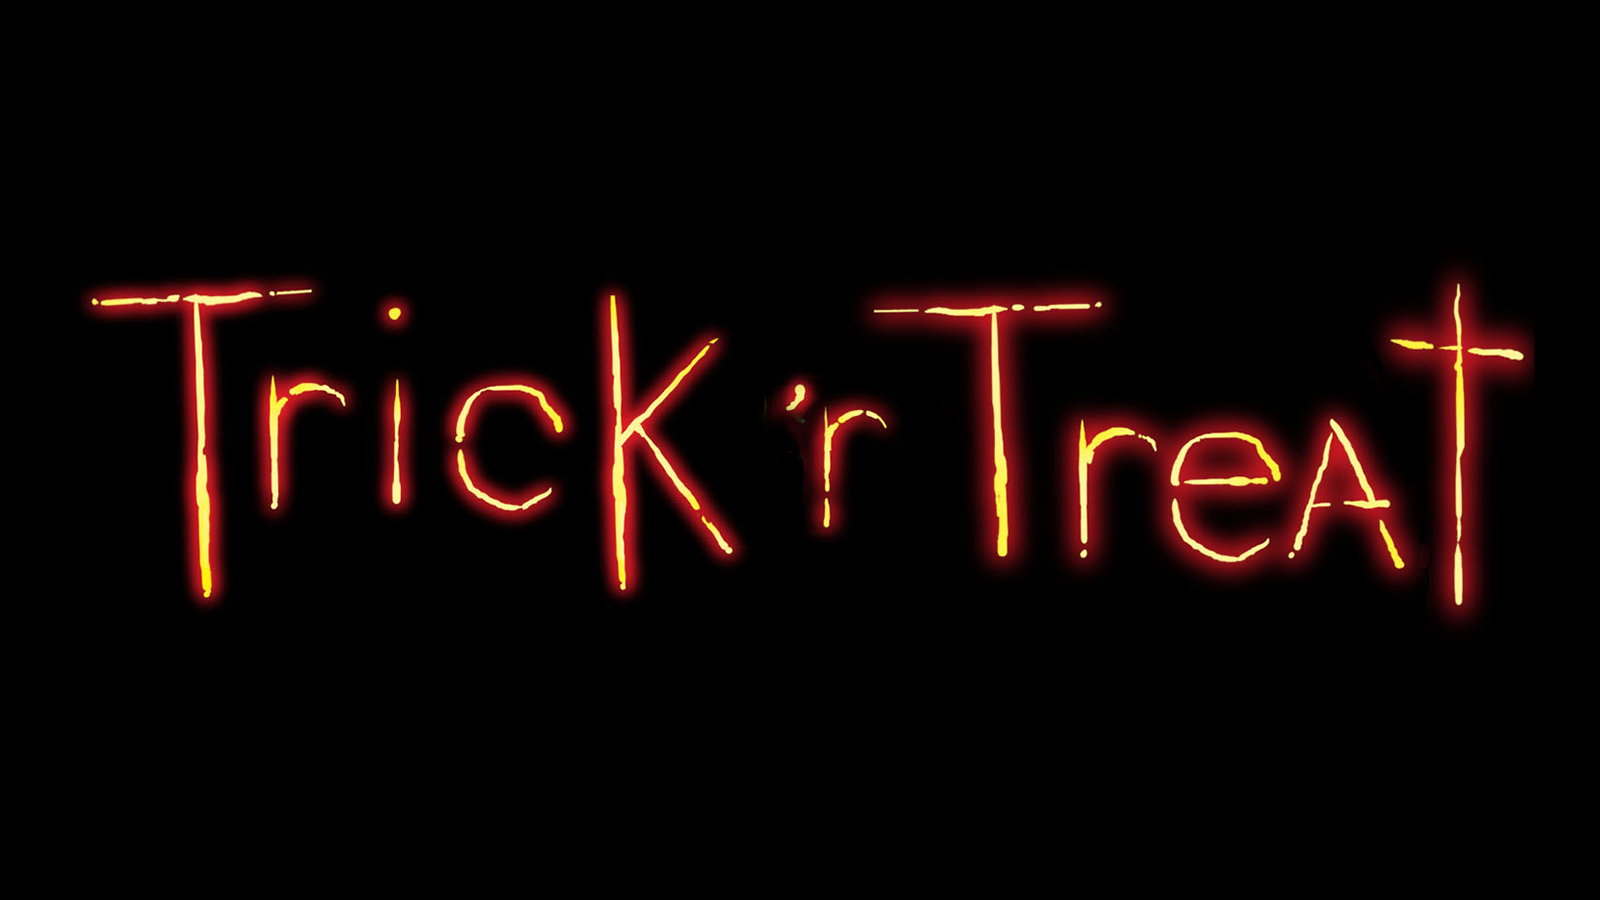 Legendary Comics Releases Special Deluxe Edition  Trick ‘r Treat Comic Book Collection in Celebration of the Beloved Cult Classic Film